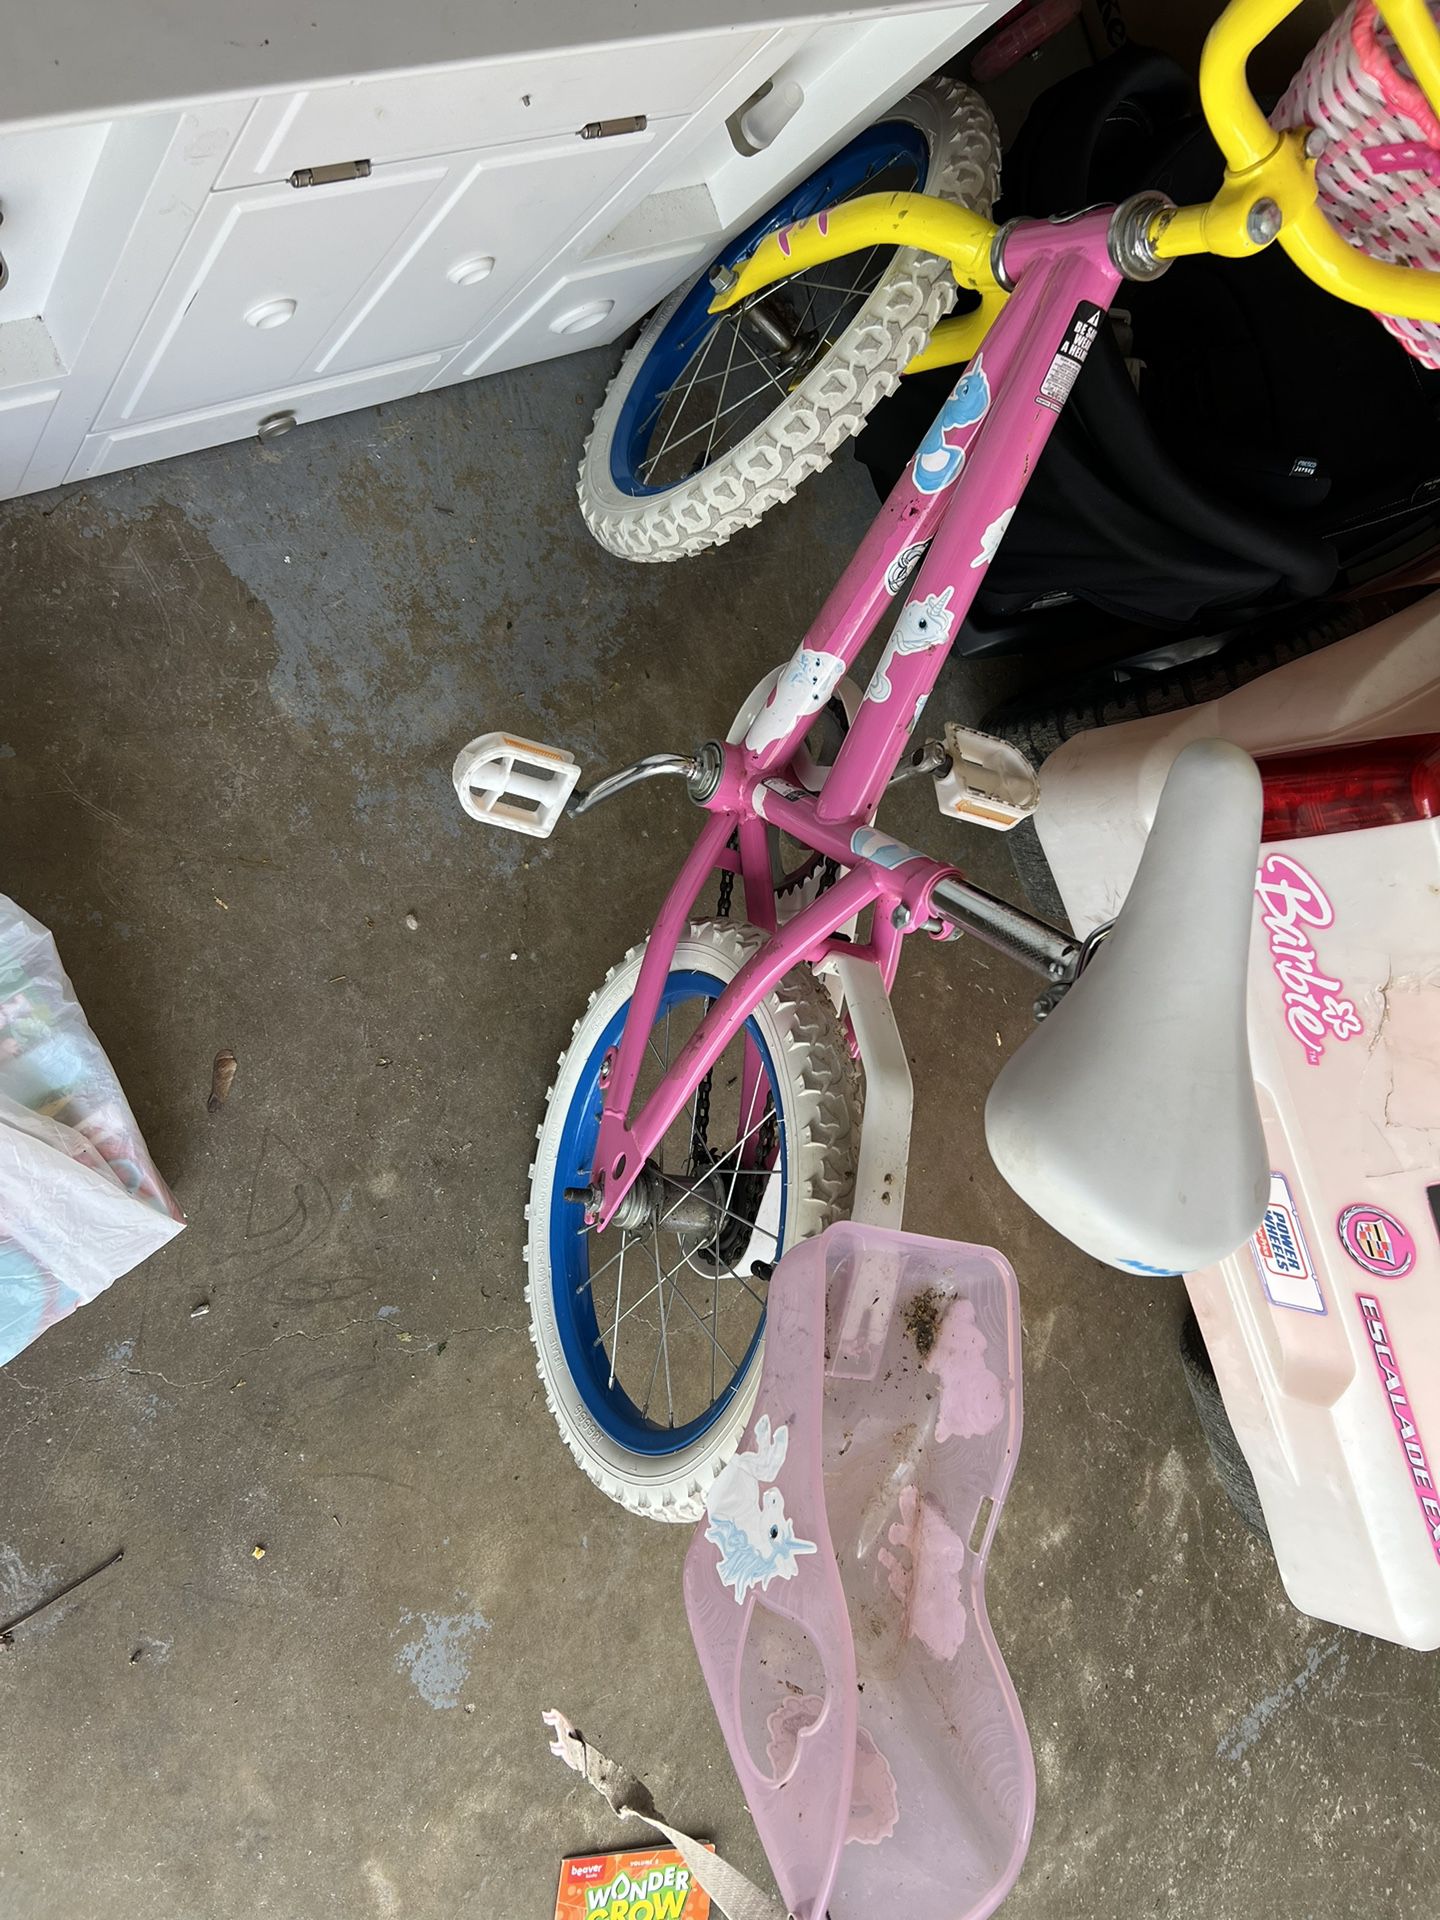 16 Inch Girls Bike With Baby Carrier (can Be Removed)